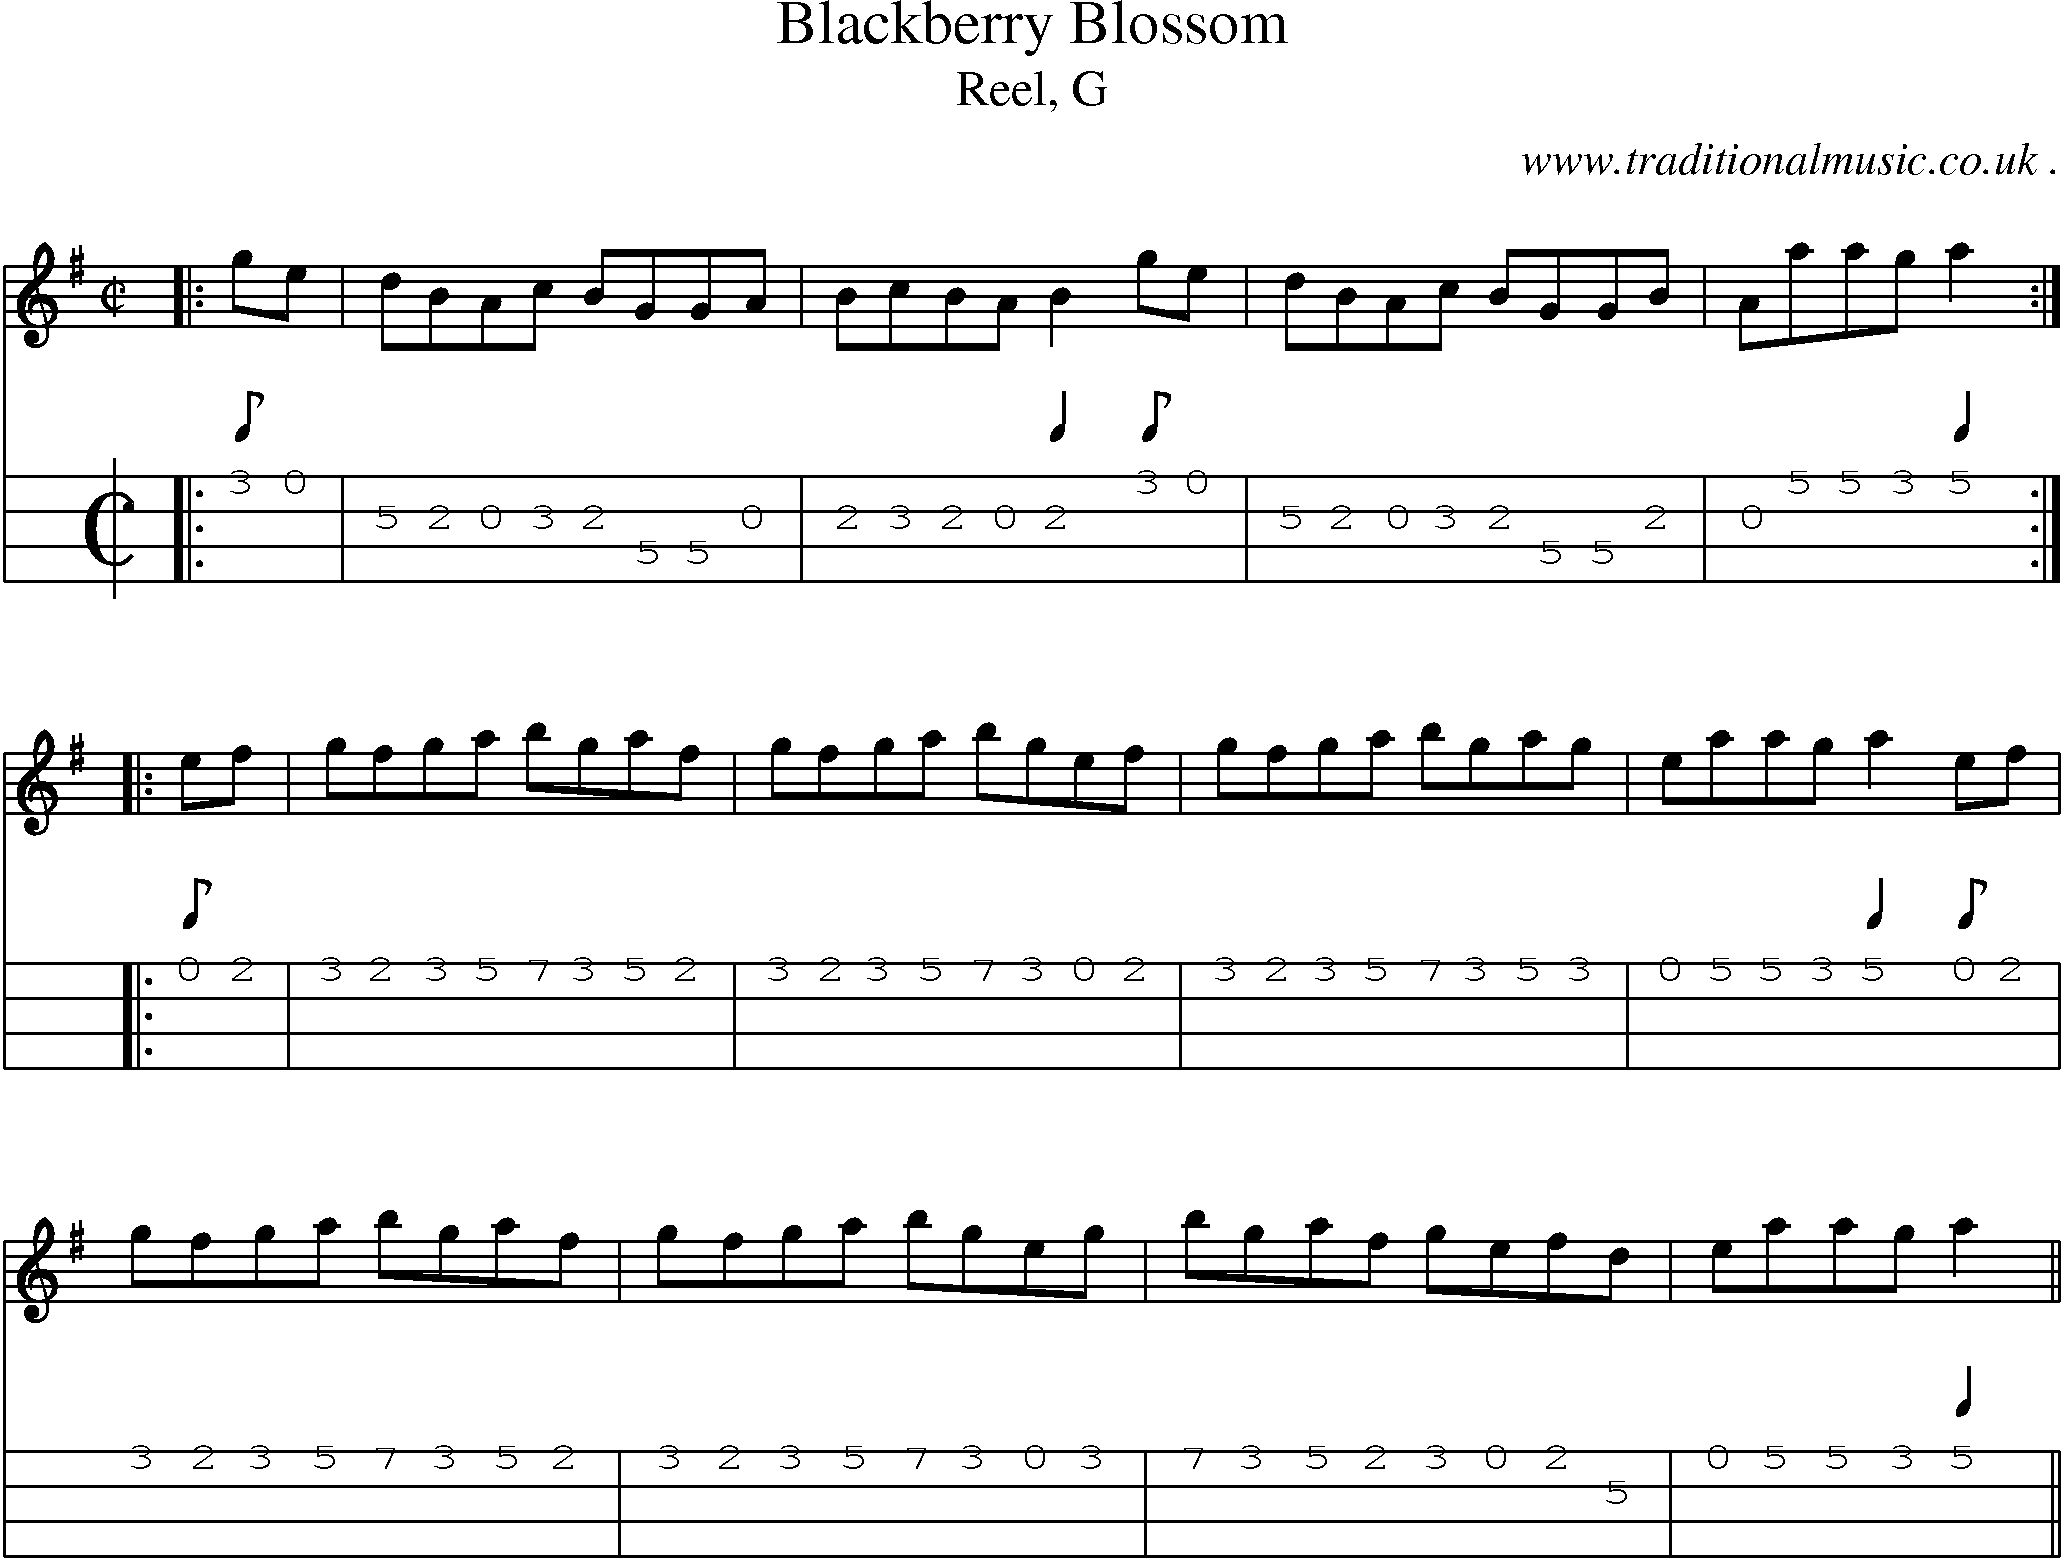 Sheet-music  score, Chords and Mandolin Tabs for Blackberry Blossom